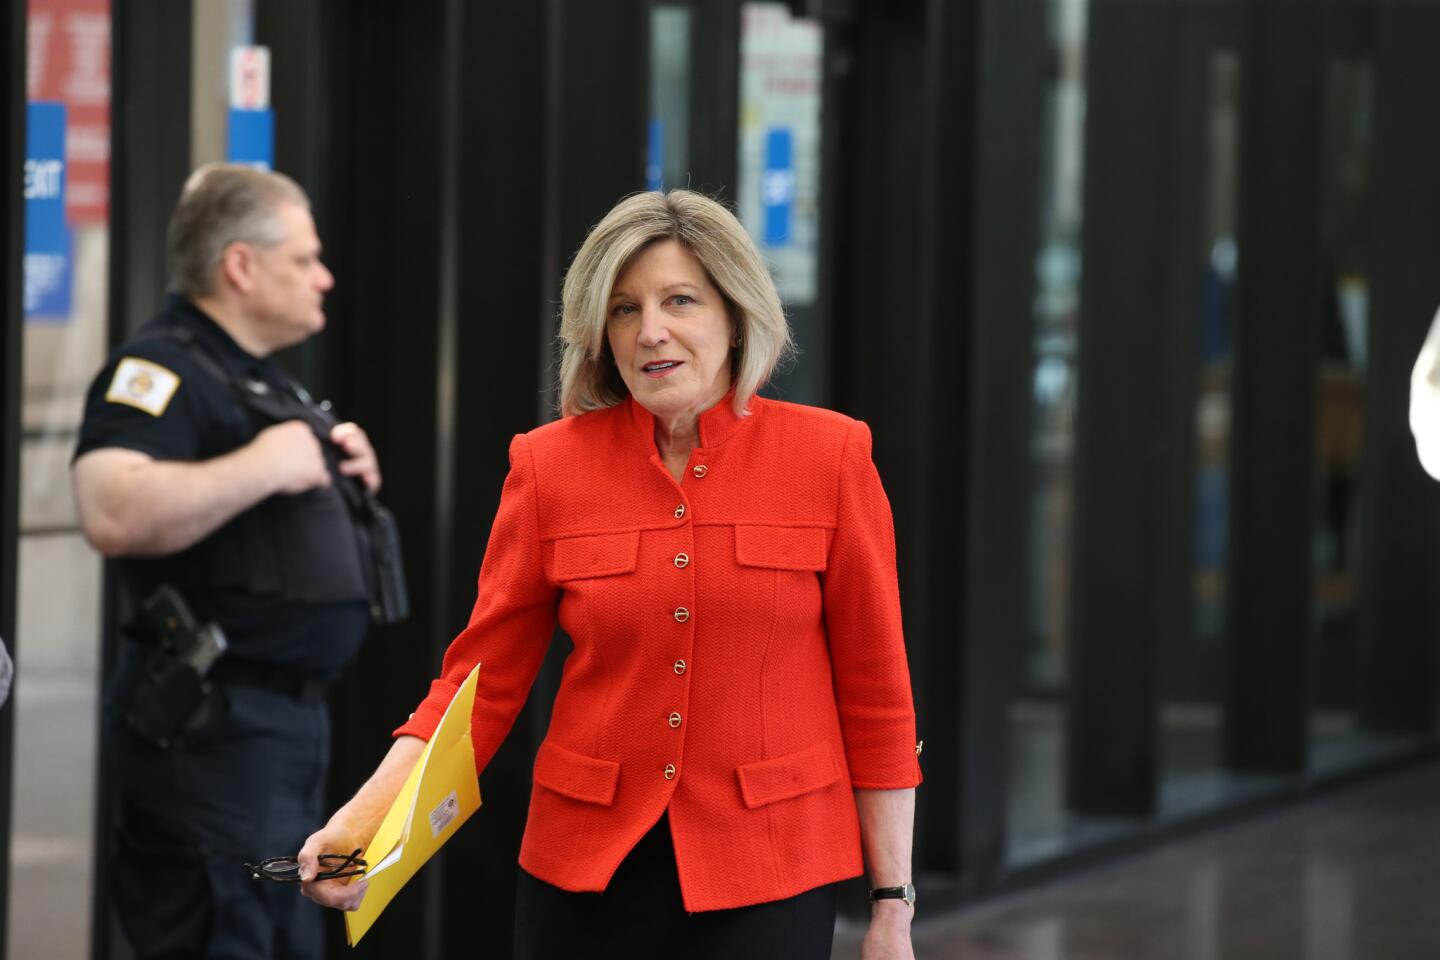 Former state appellate Judge Sheila O'Brien arrives at the Leighton Criminal Court Building on June 21, 2019, for a hearing where a Cook County judge is to decide whether he will appoint a special prosecutor to investigate the controversial decision to drop all charges against Jussie Smollett.